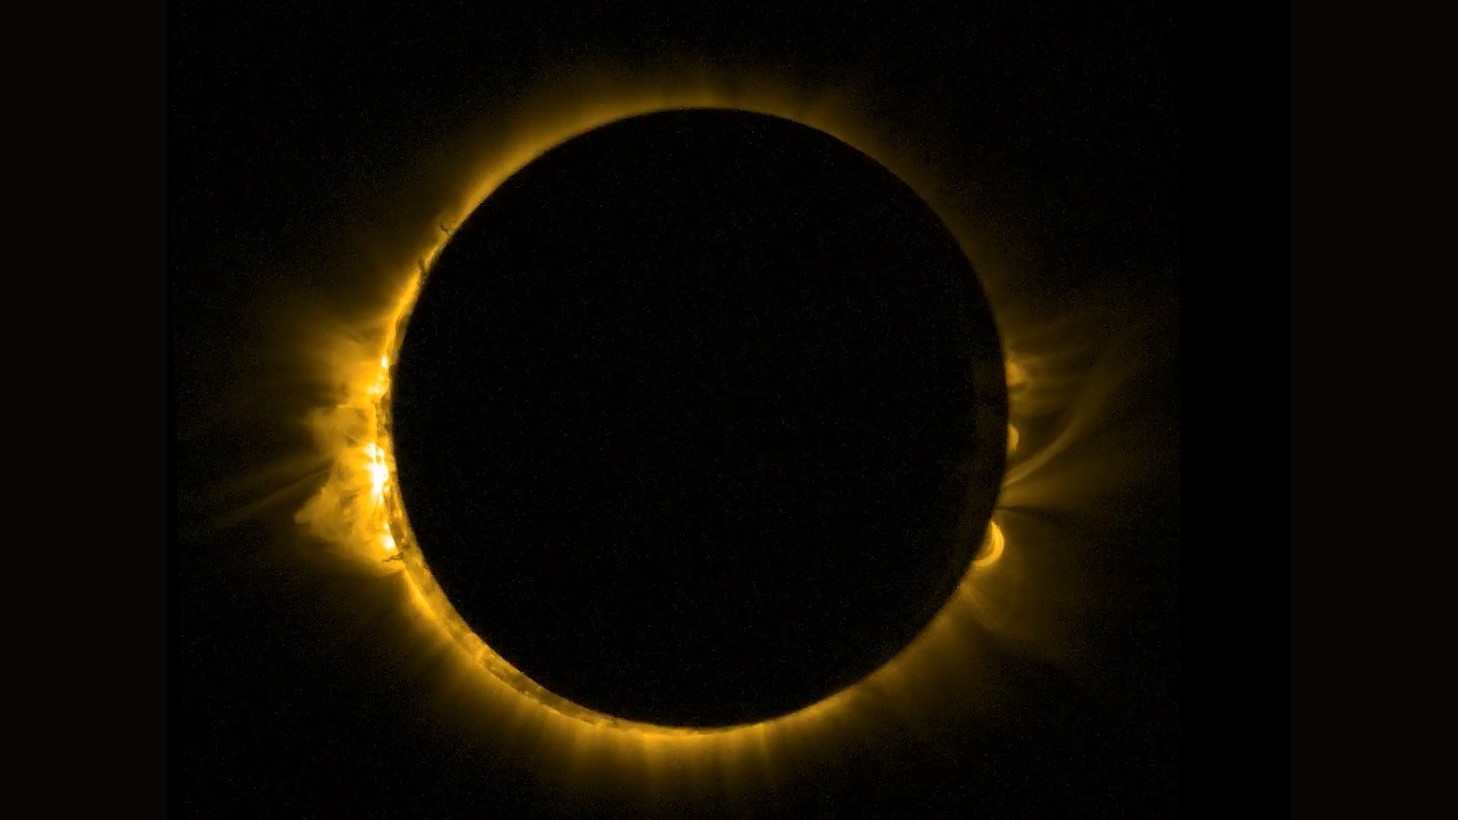 'Zeus made night from mid-day': Terror and wonder in ancient accounts of solar eclipses